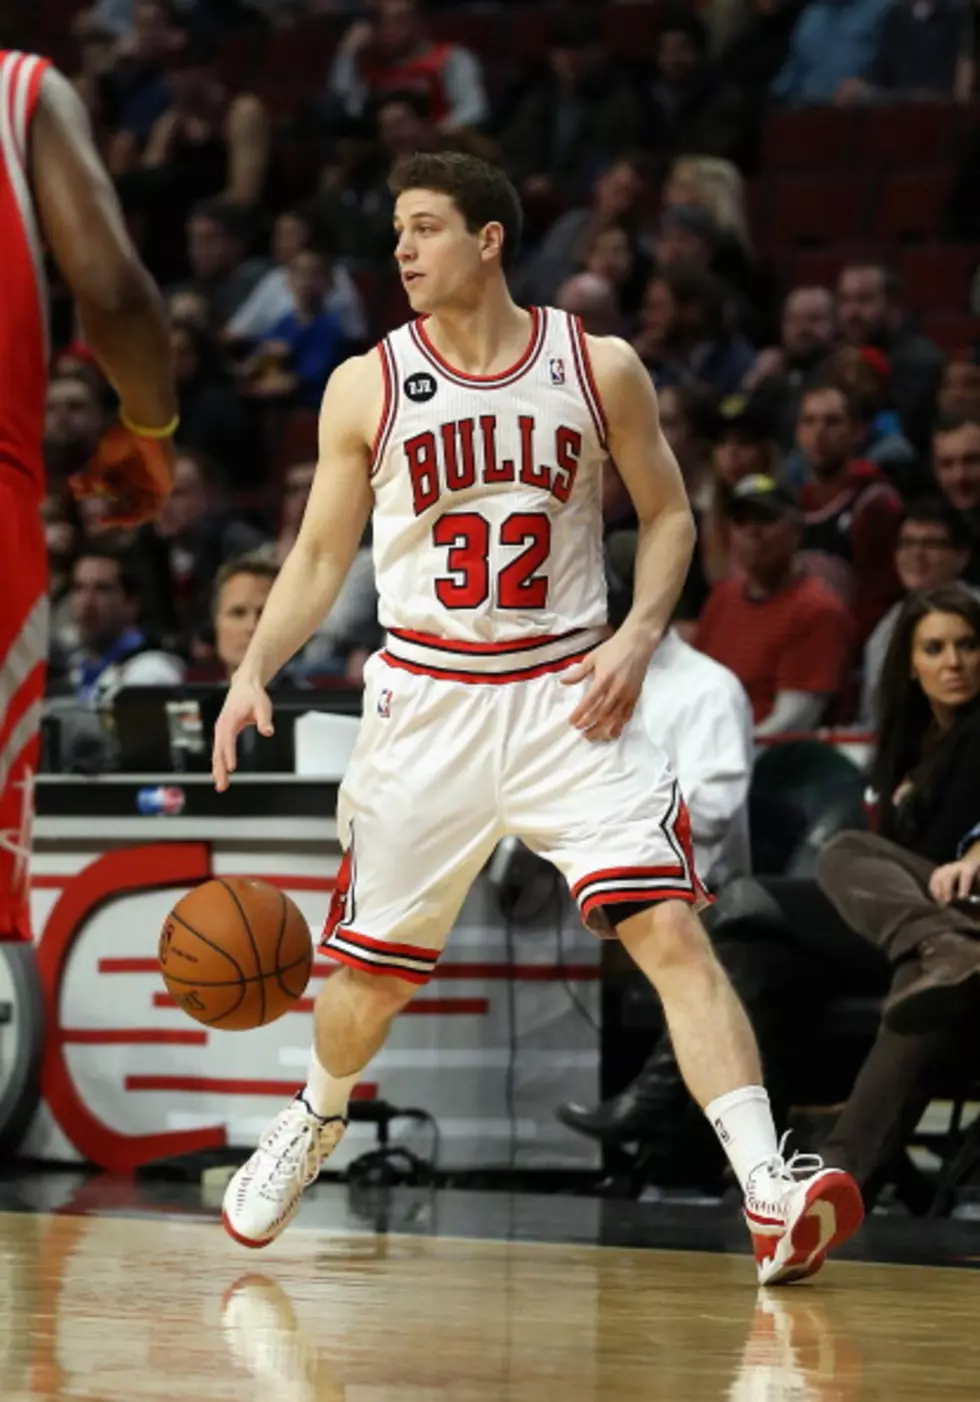 Pelicans Sign Jimmer Fredette To One Year Deal, Where Does He Fit?